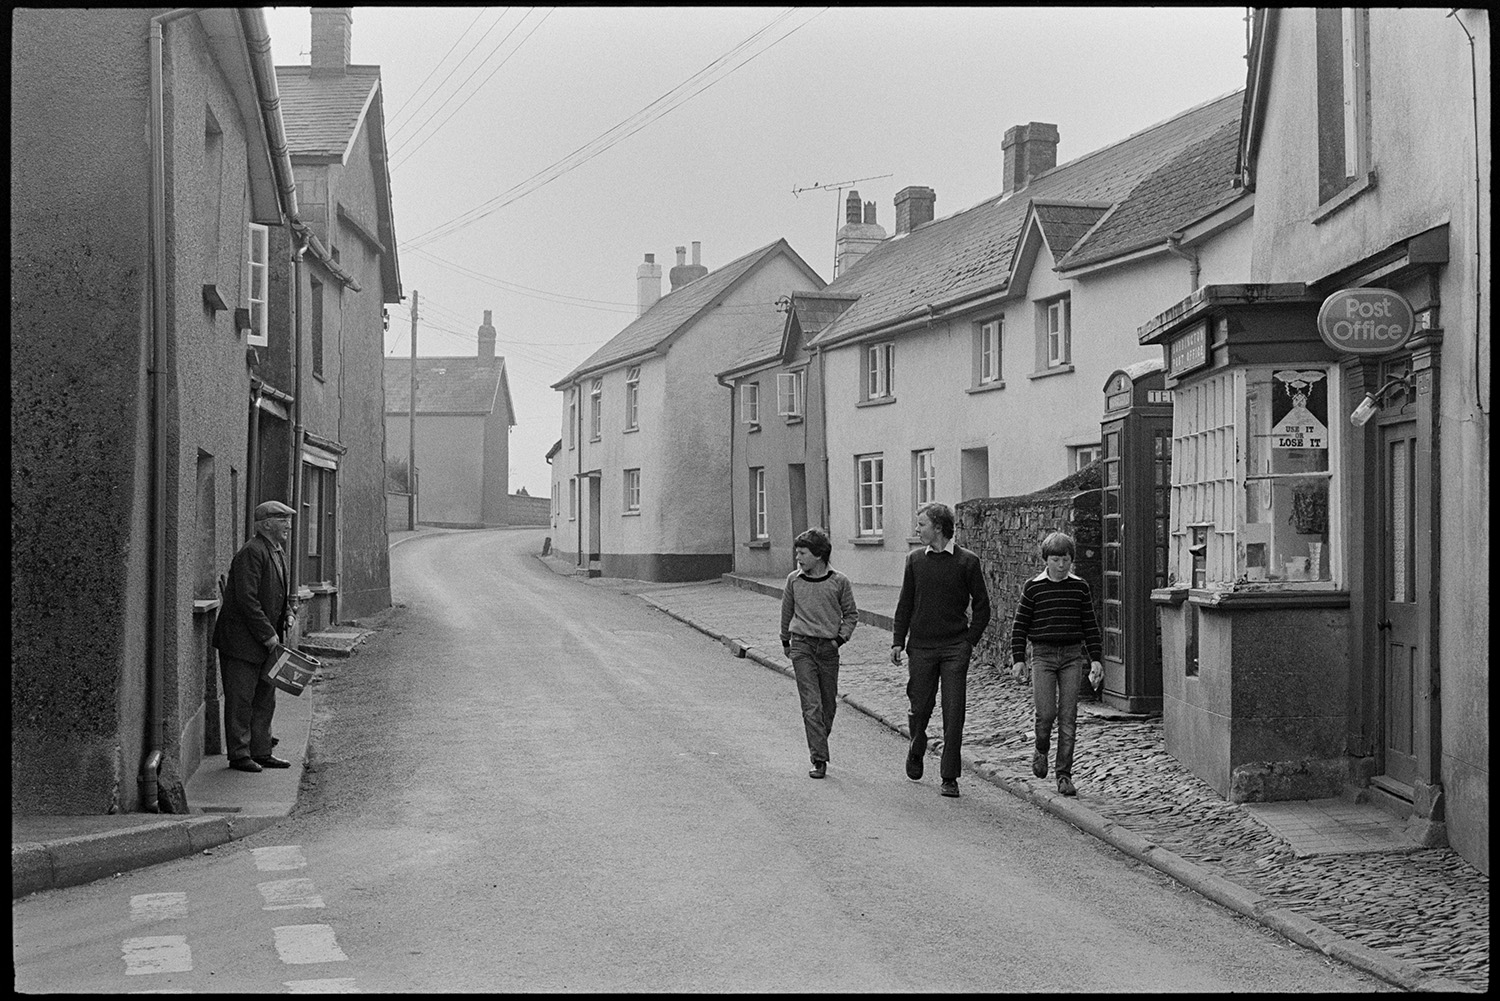 Street scene, early morning passers by, men chatting, front of Post Office, cobbles. <br />
[A man and two boys talking to another man on the opposite side of the street, as they walk past Burrington Post Office and telephone box in the early morning. The pavement is cobbled and houses can be seen further along the street.]